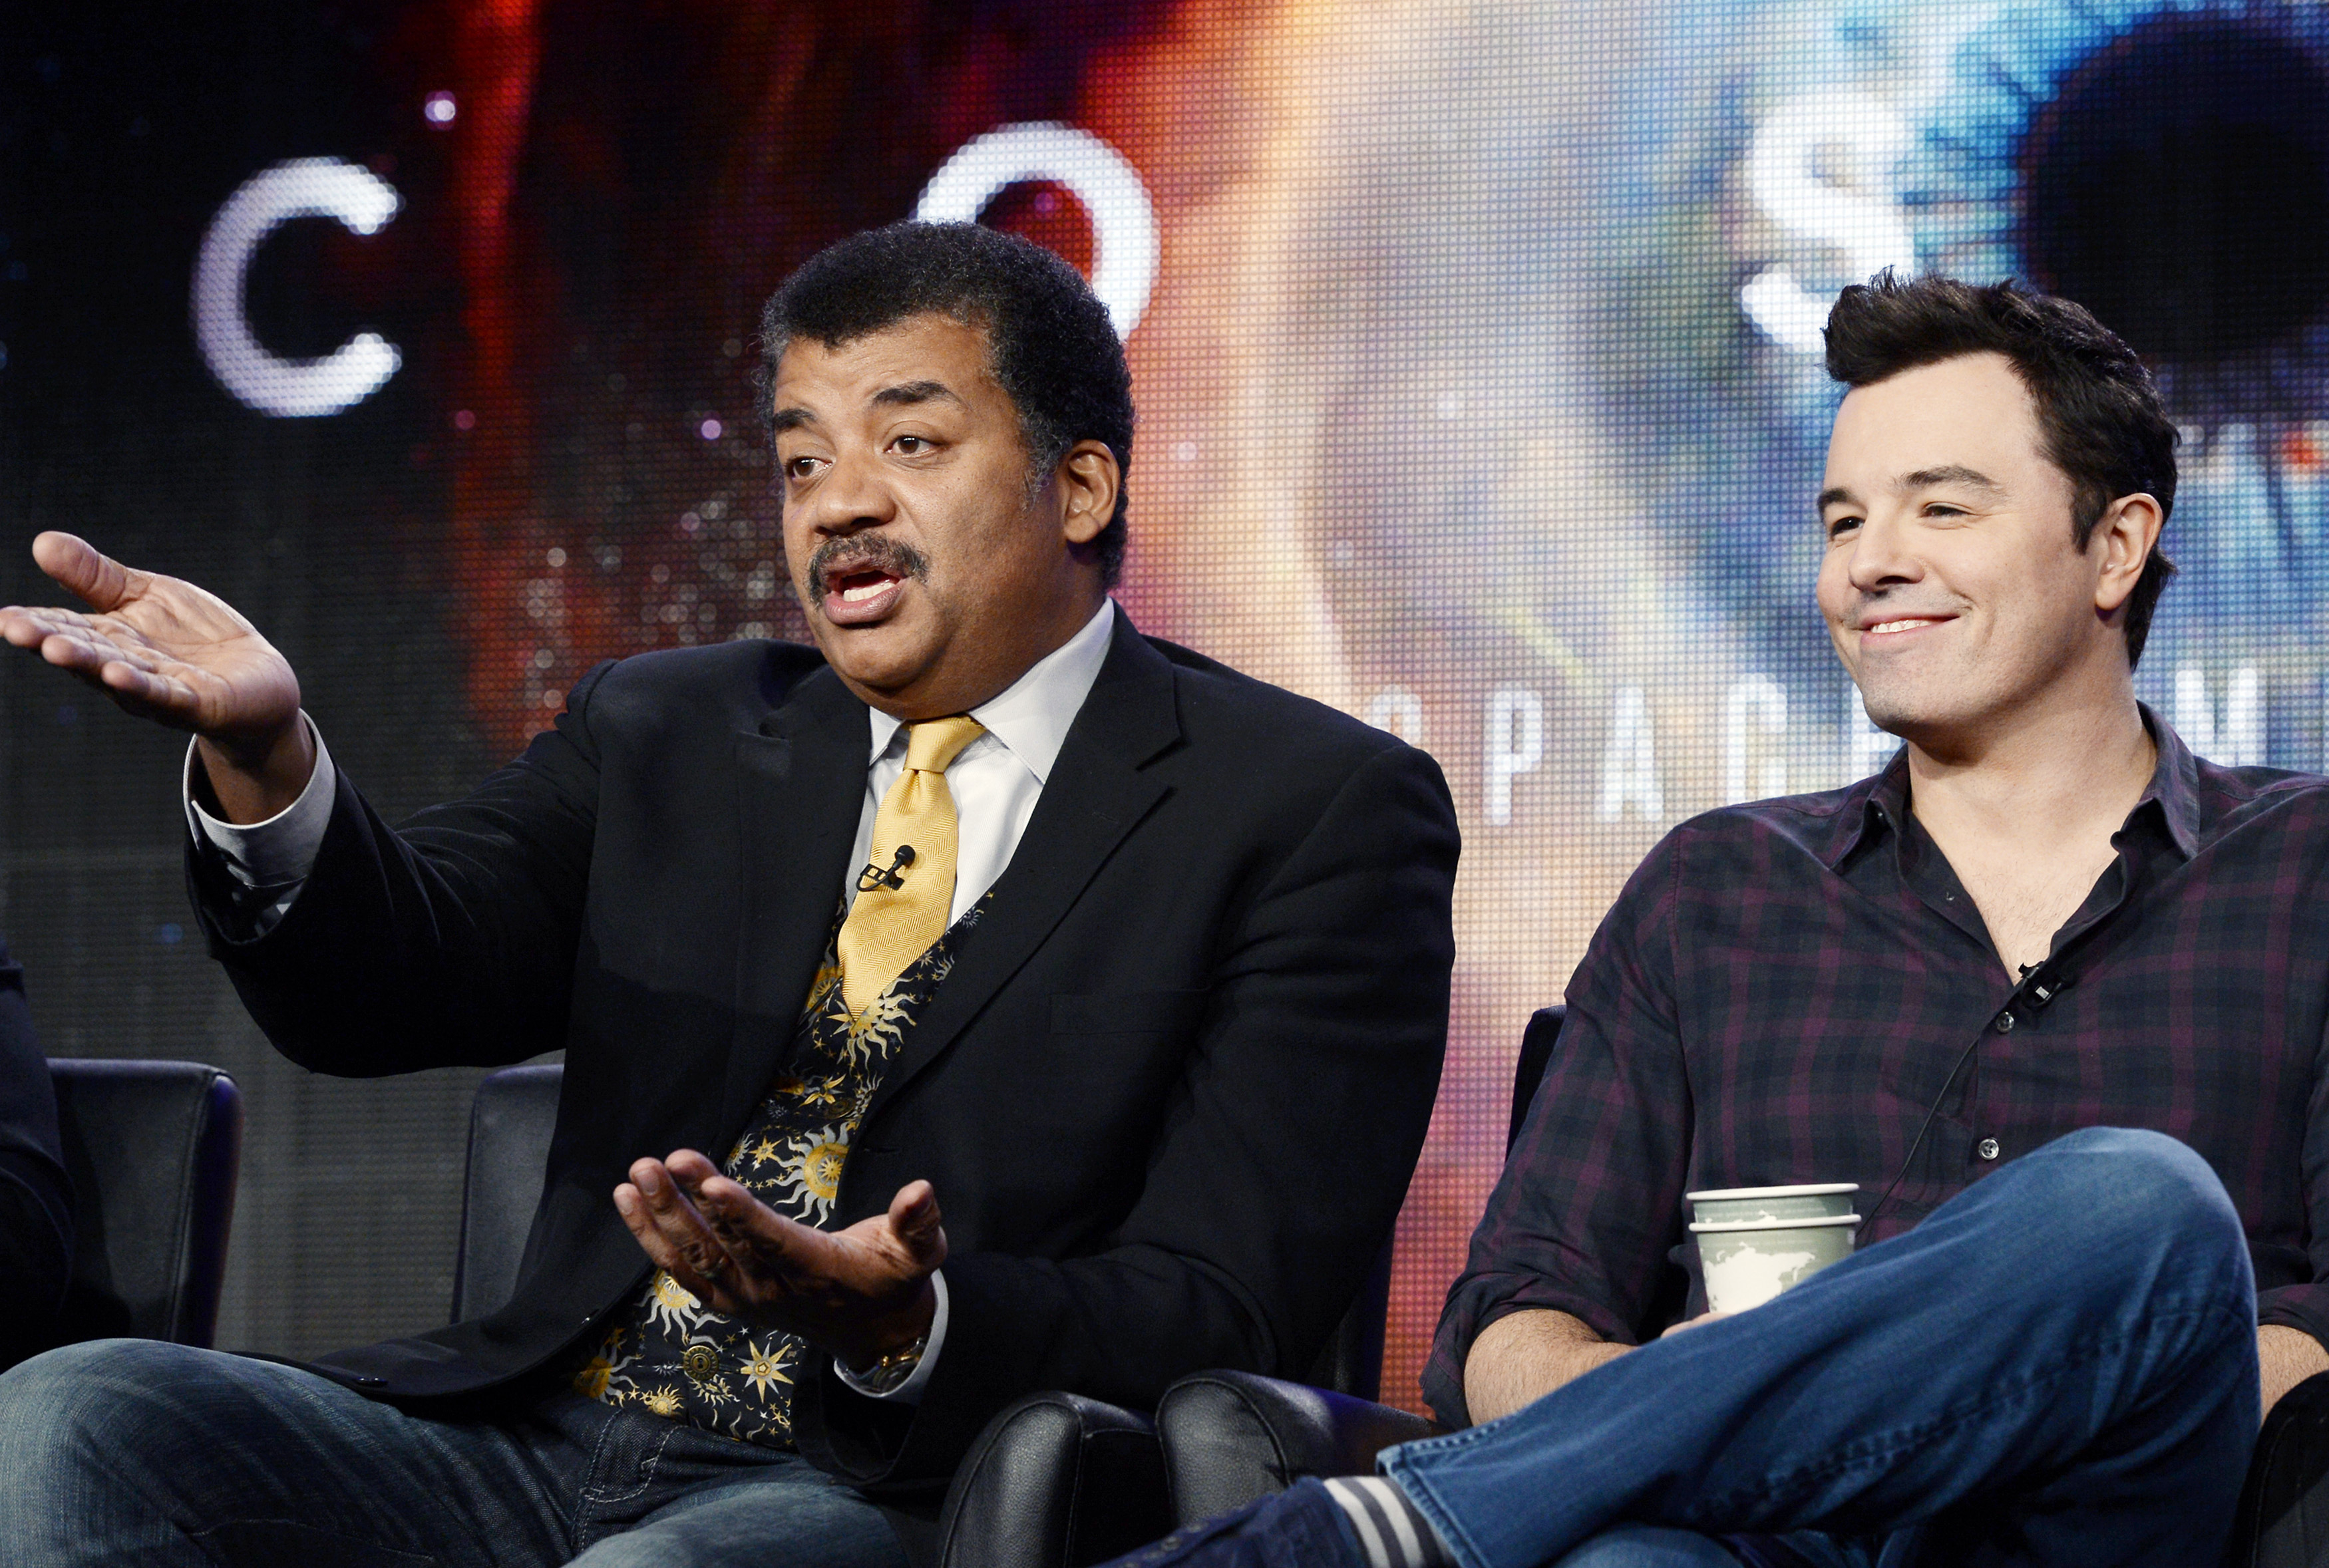 Host Neil deGrasse Tyson, left, and Seth MacFarlane, executive producer of <i>Cosmos</i>, participate in Fox Broadcasting Company's part of the Television Critics Association (TCA) Winter 2014 presentations in Pasadena, Calif., on Jan. 13, 2014 (Kevork Djansezian—Reuters)